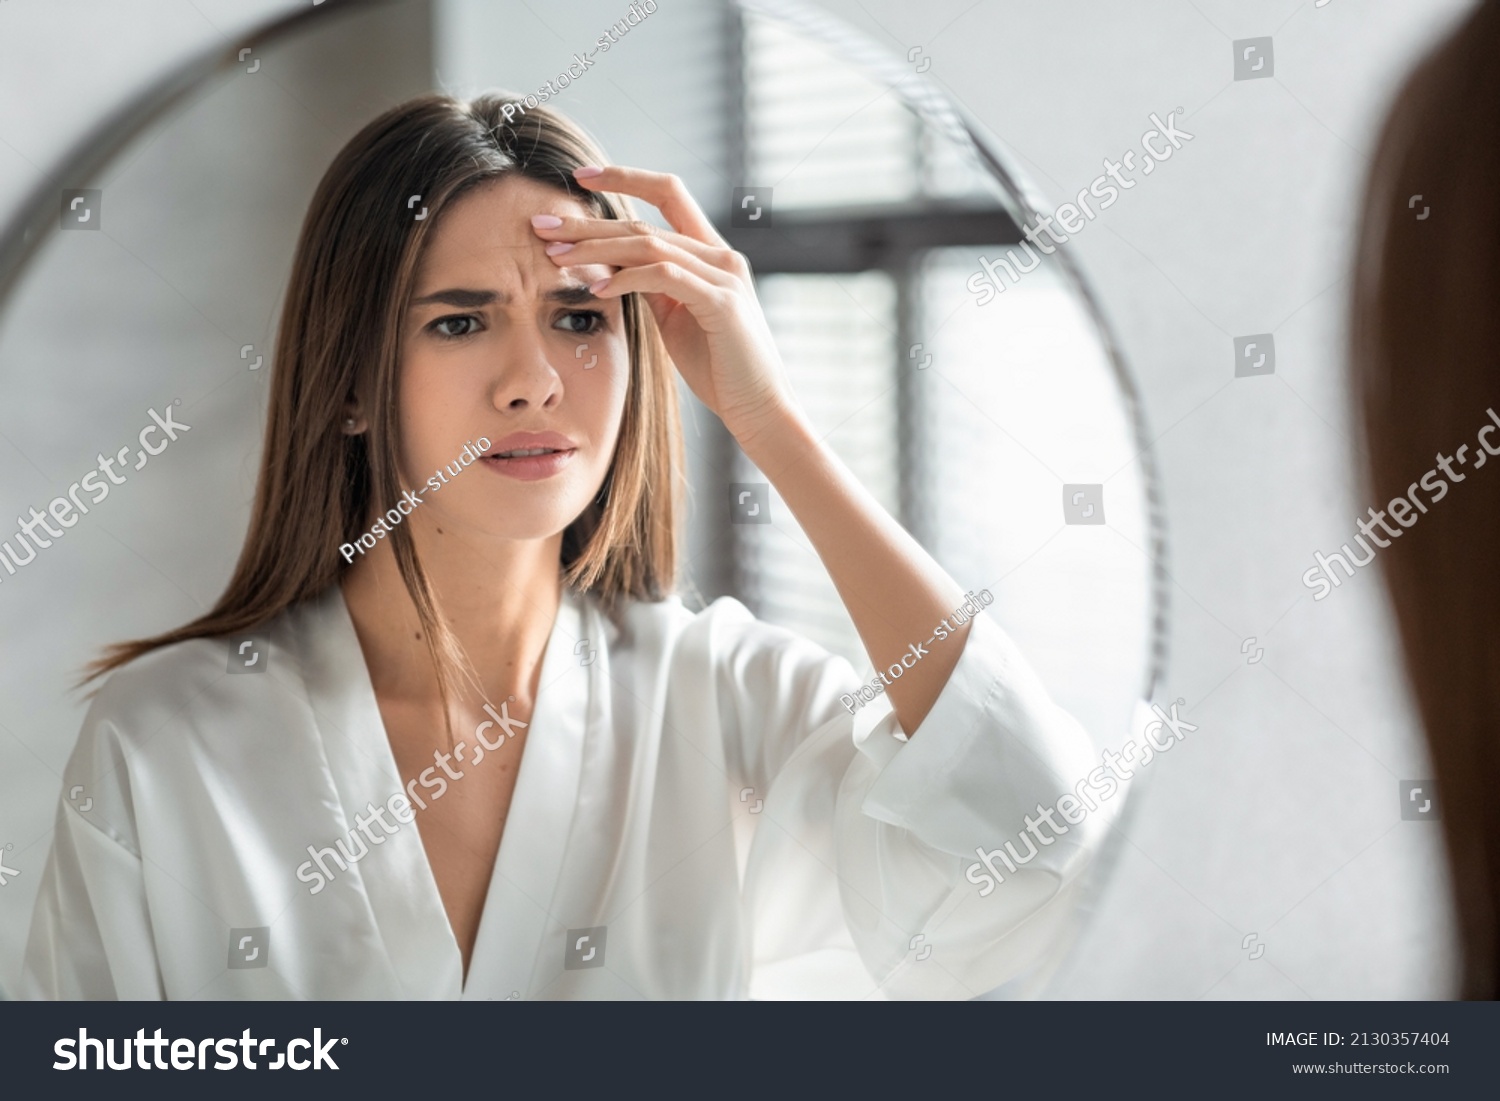 Unhappy Young Woman Looking In Mirror And Touching Wrinkles On Her Face, Attractive Millennial Female Standing In Bathroom And Examining Skin Fine Lines, Selective Focus On Reflection, Closeup #2130357404